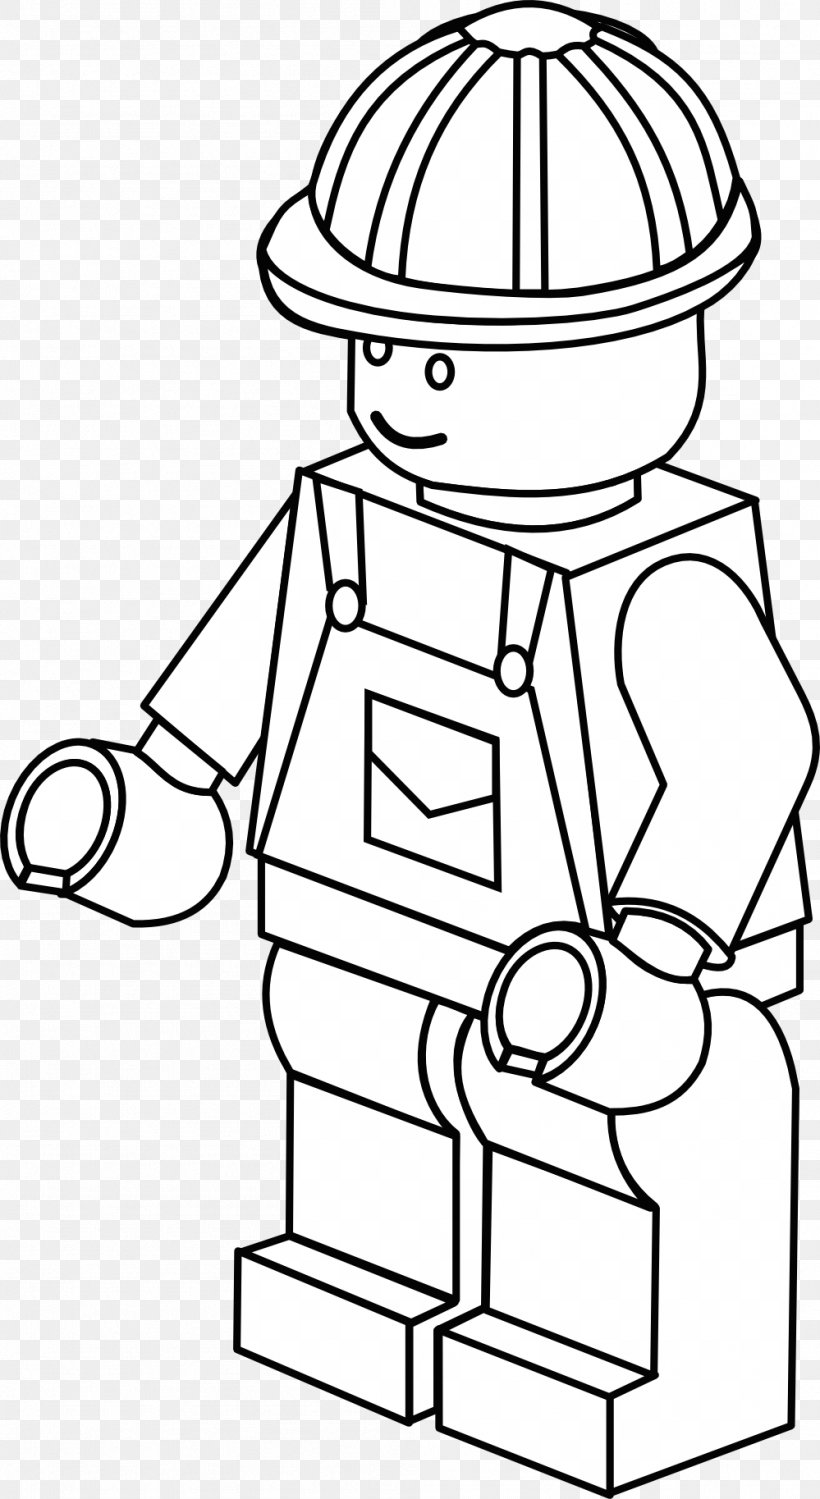 colouring-pages-coloring-book-lego-minifigure-firefighter-png-999x1827px-colouring-pages